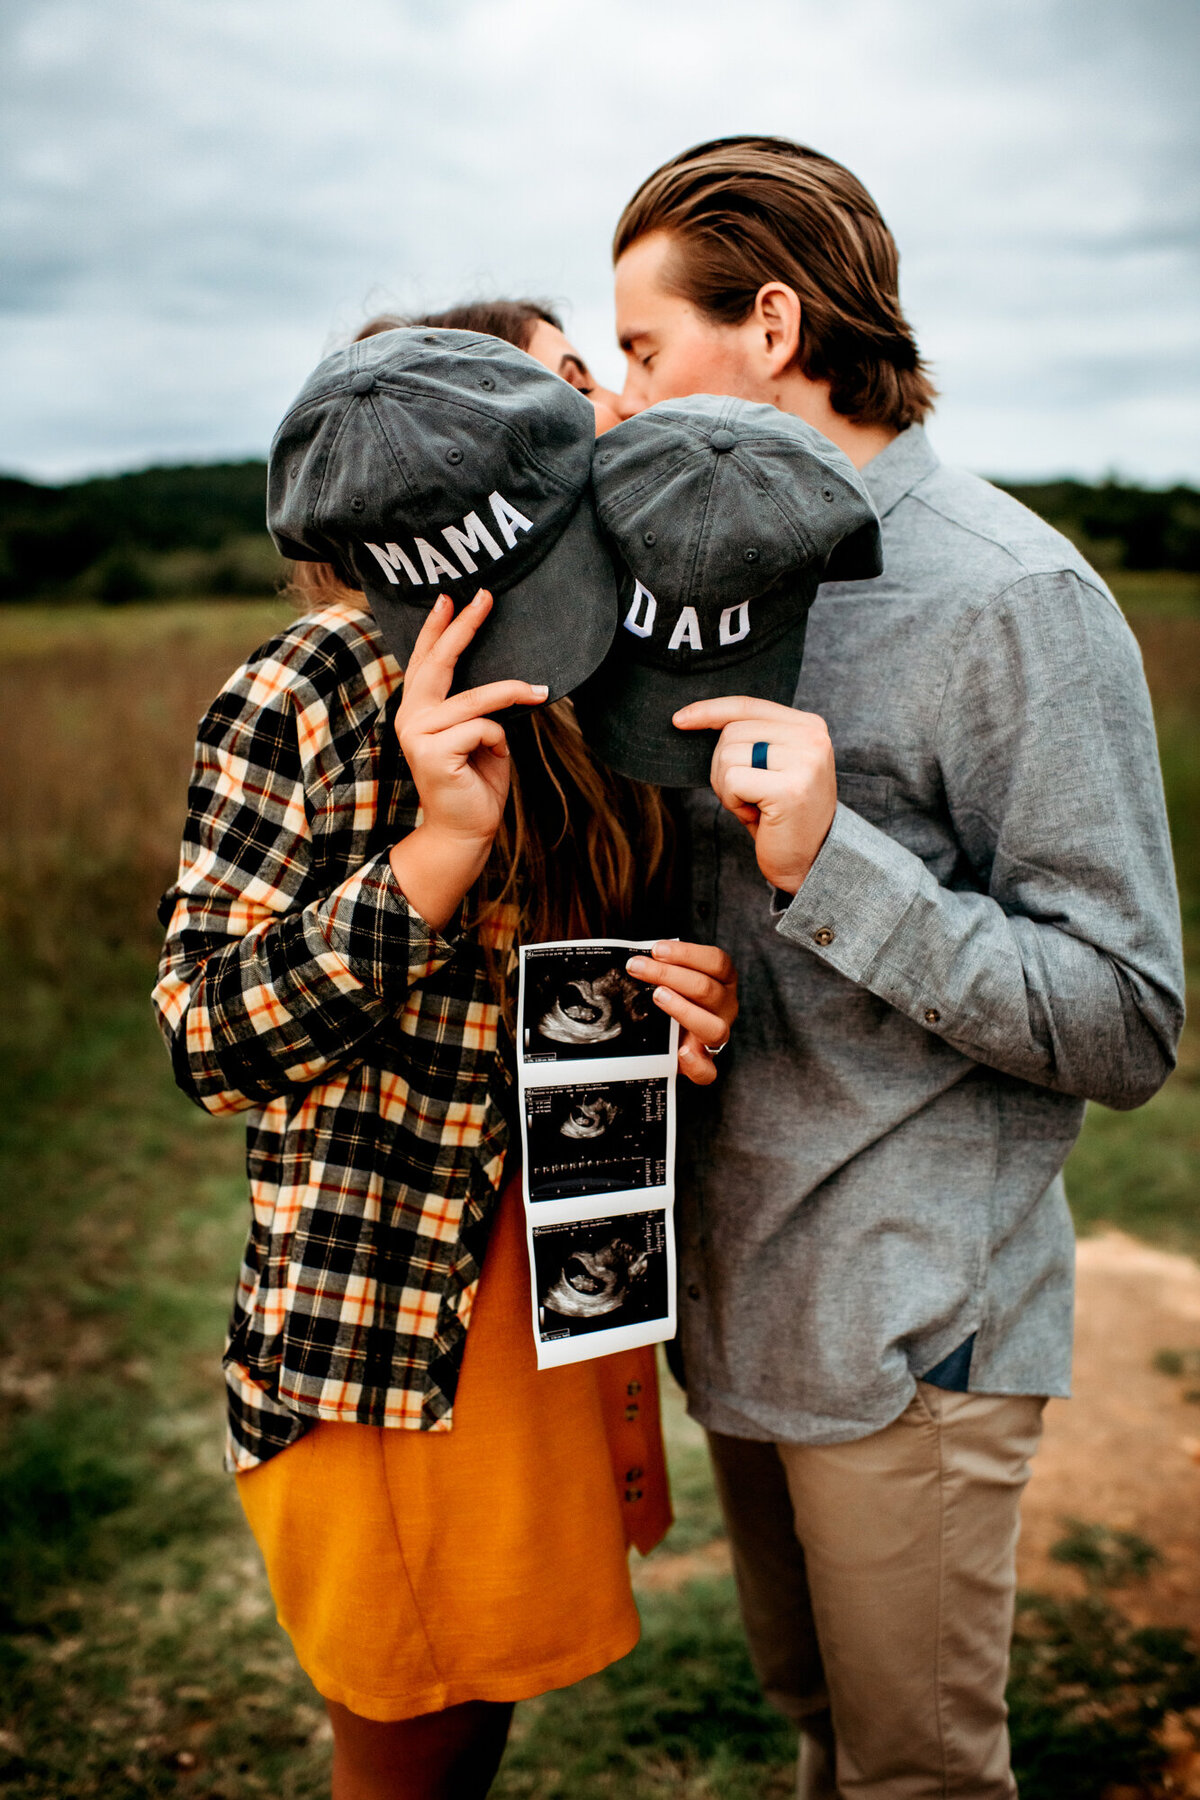 Couples Photography, Woman holding hat that says "Mama" and also holding an ultrasound, hides her face behind the hat as she kisses a man that holds a hat that says "Dad" and kisses the hat.